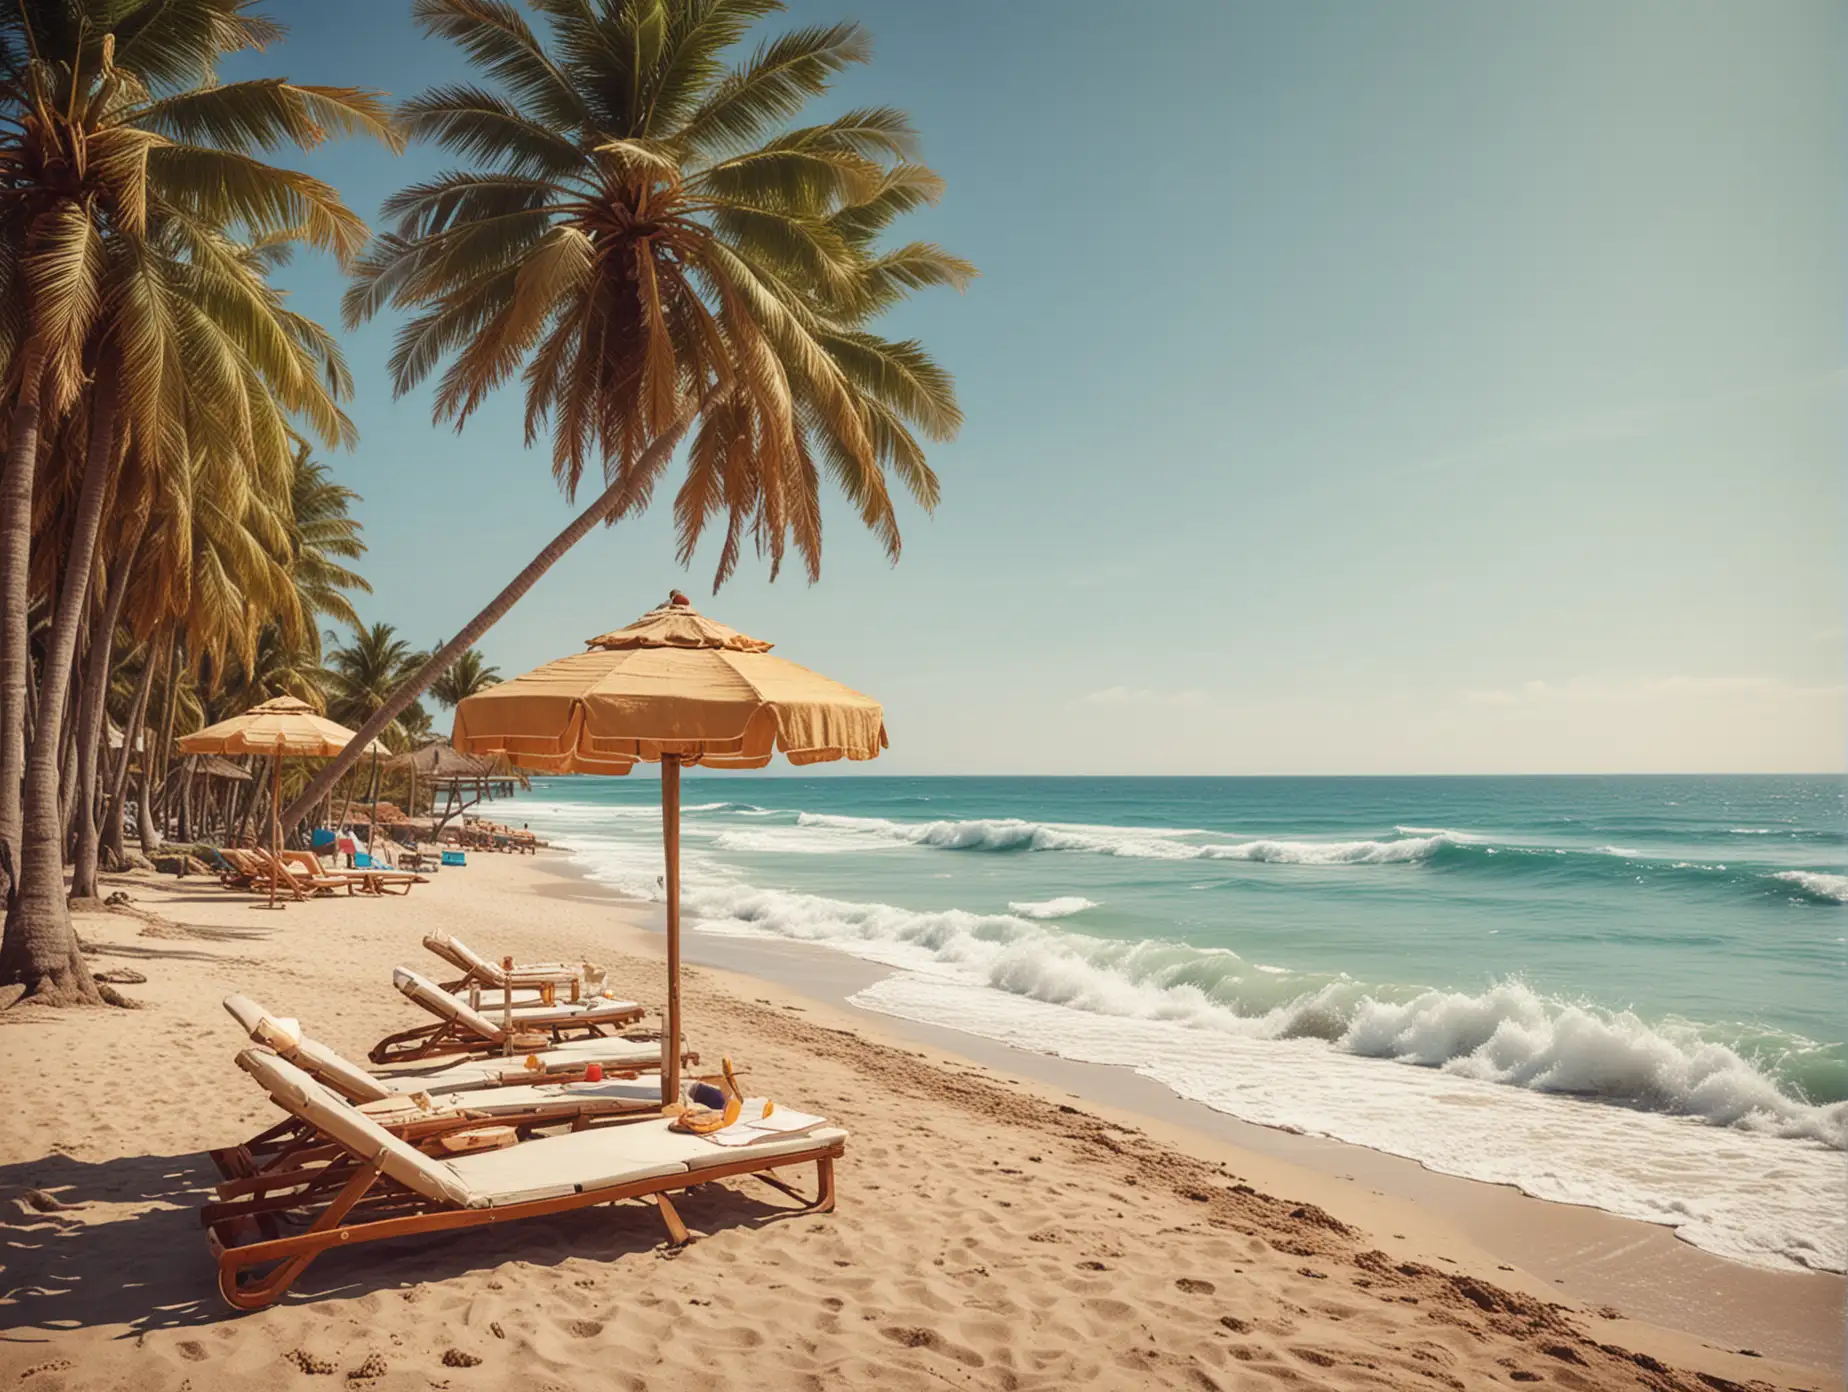 Tropical Beach Scene with Palm Trees Umbrellas and Sea Waves